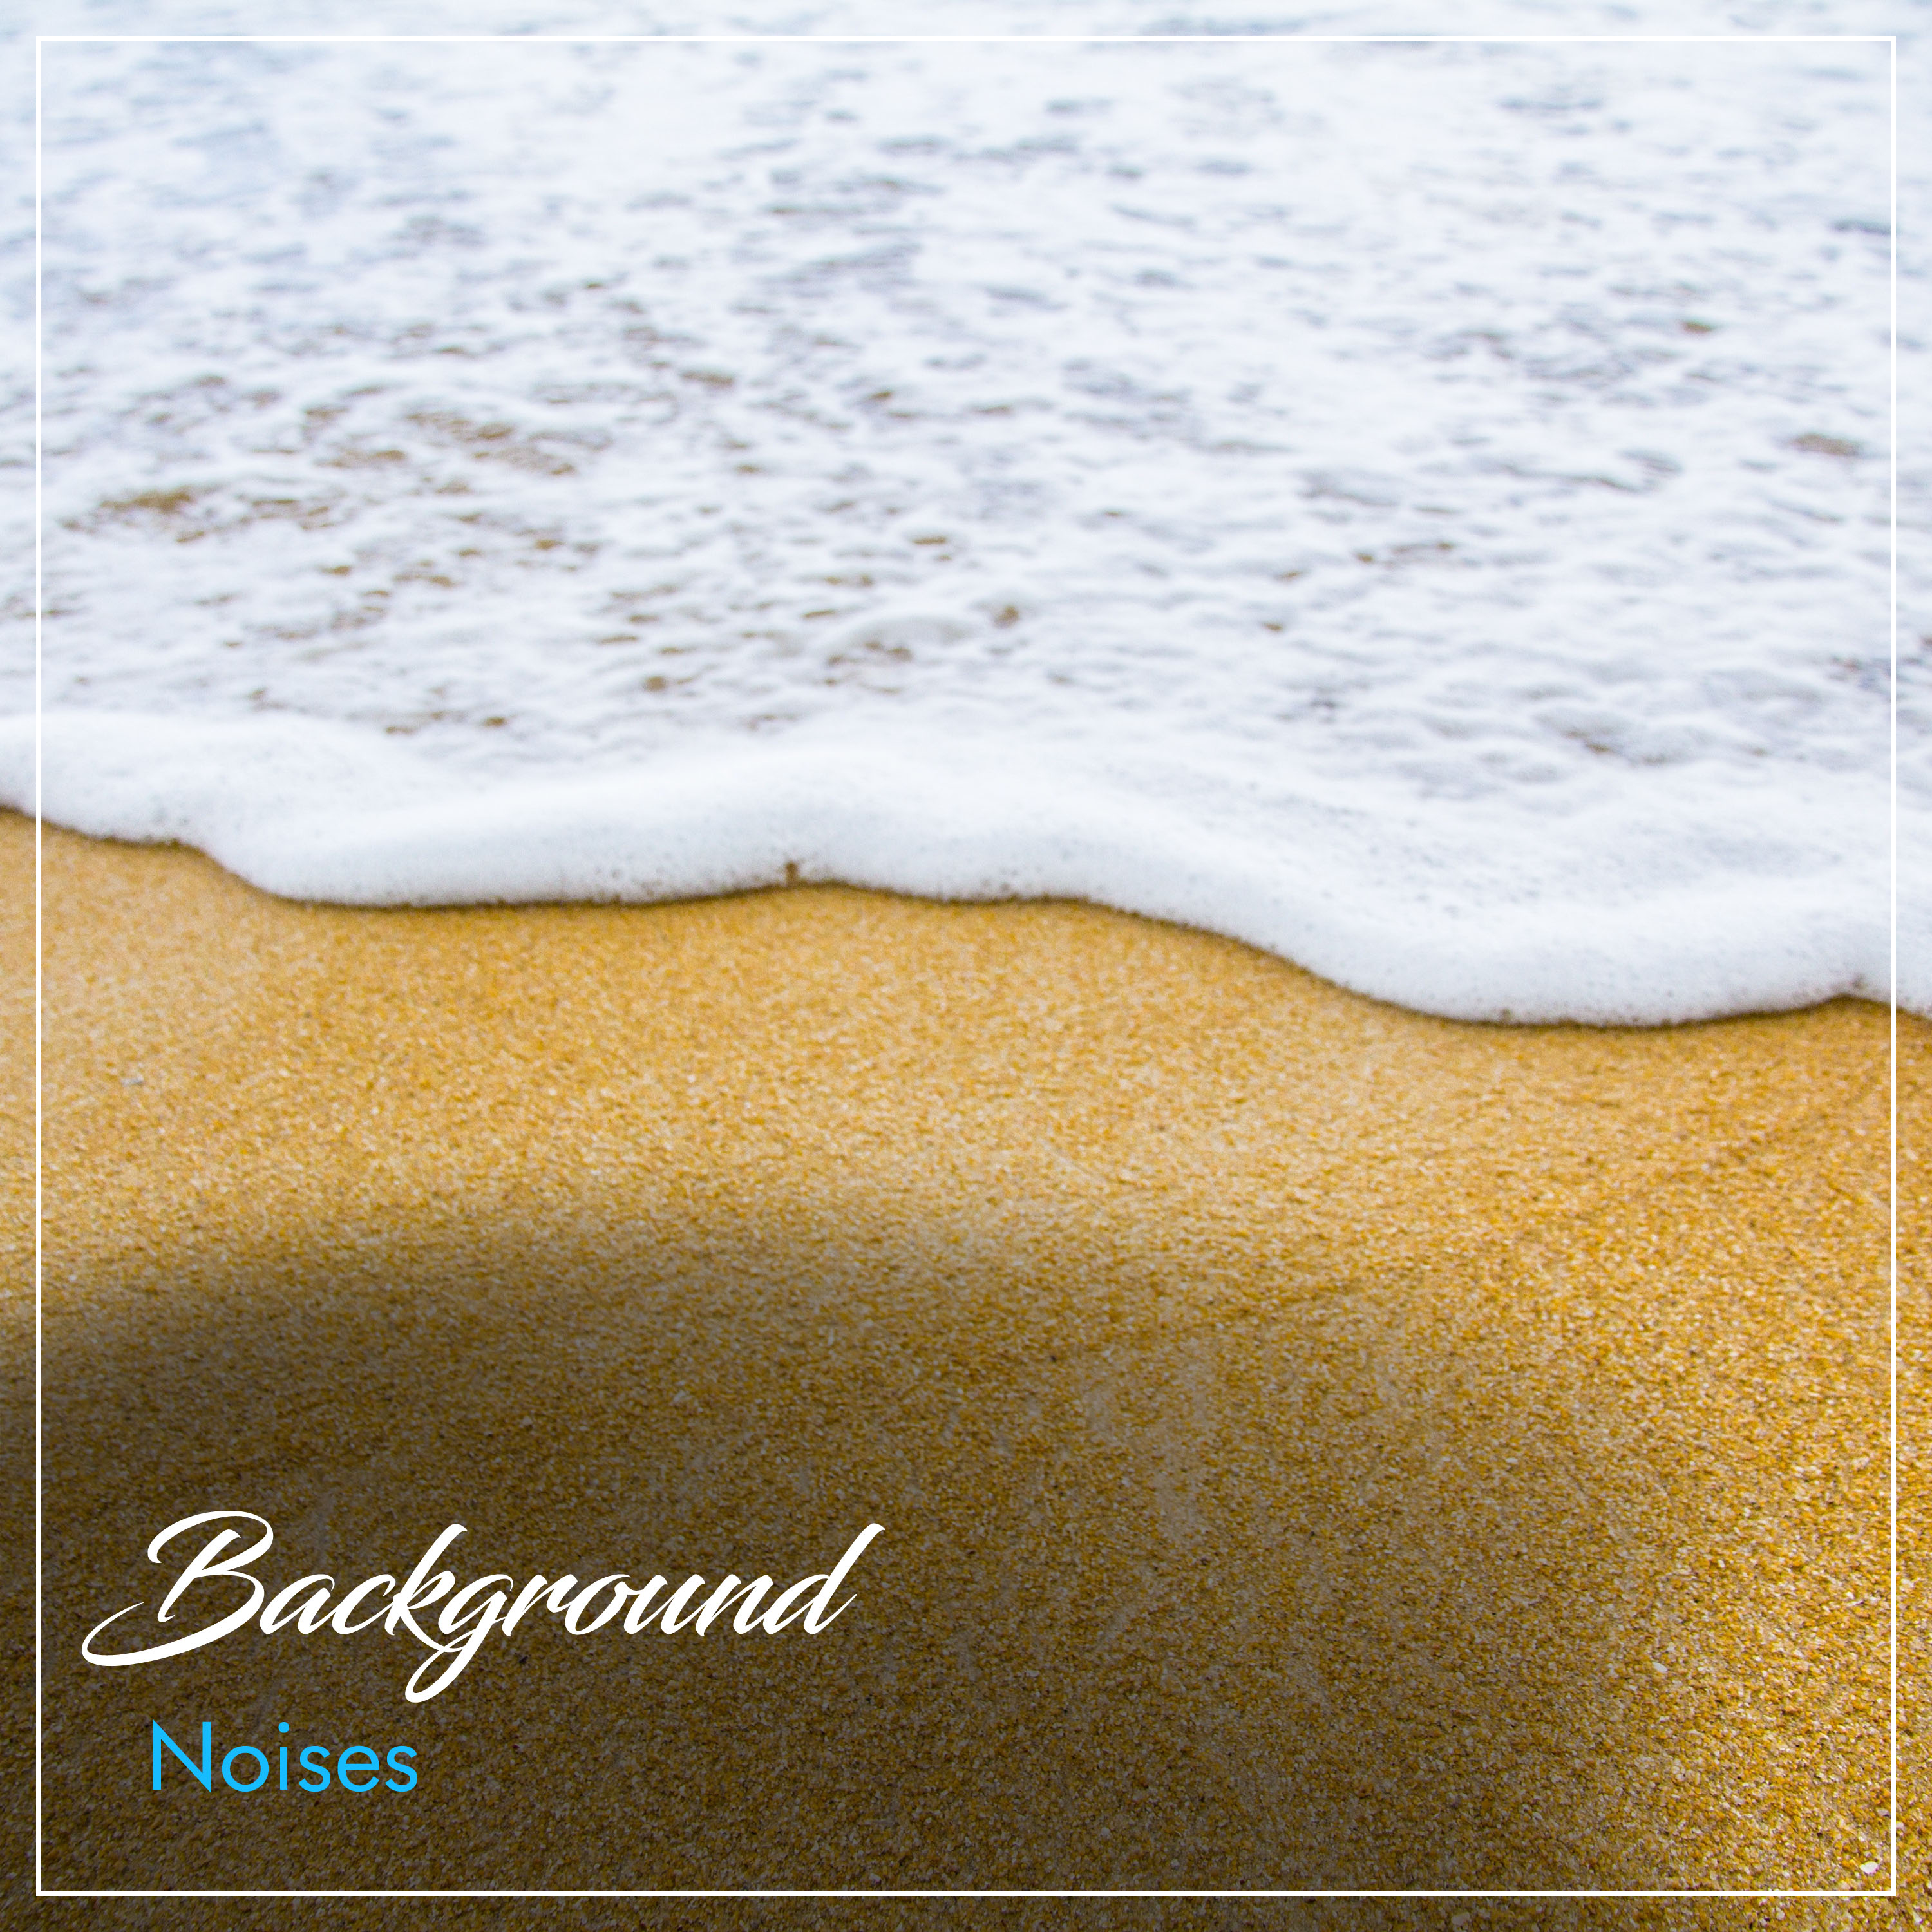 #11 Background Noises for Spa & Relaxation